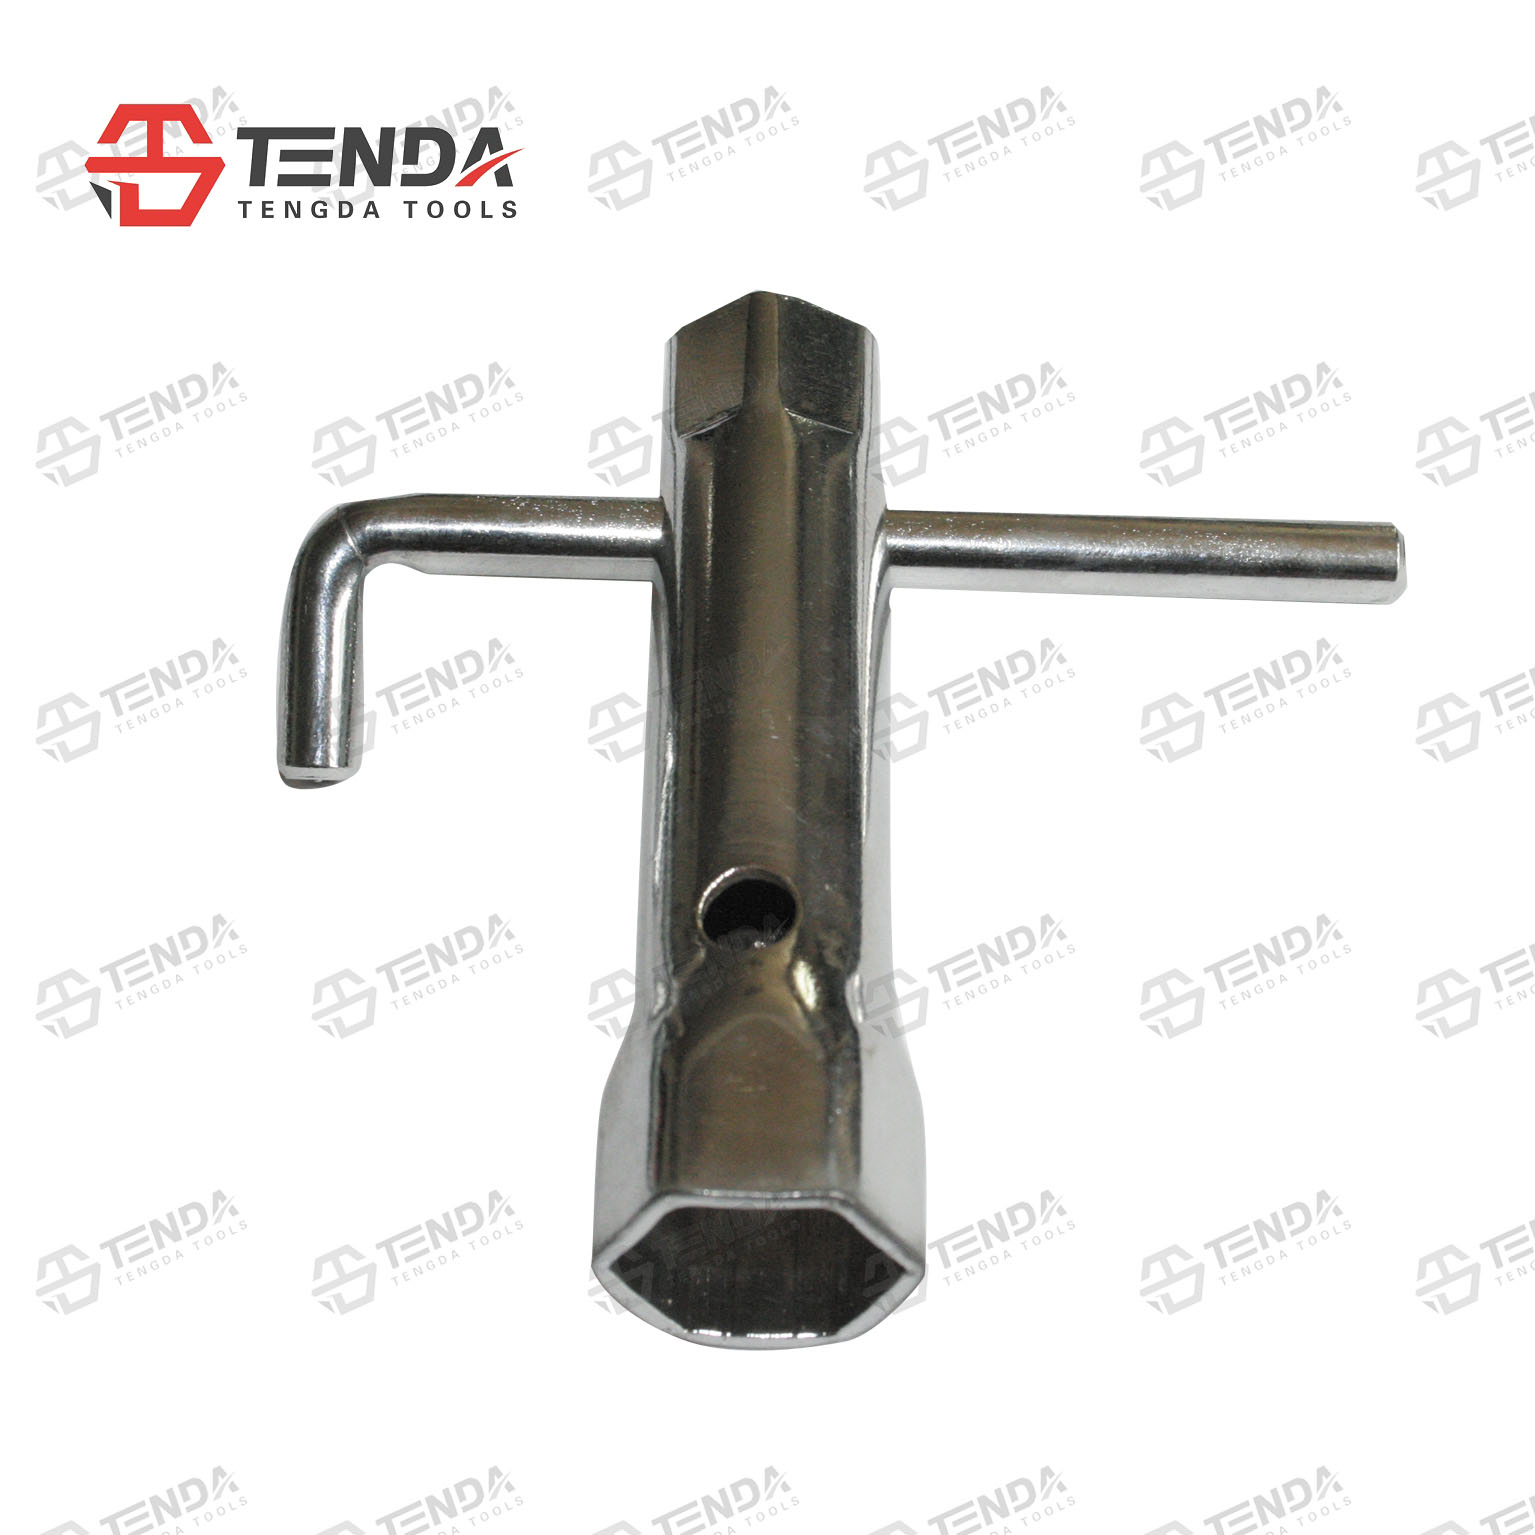 TD-070-02 Spark Plug Wrench with L-Handle